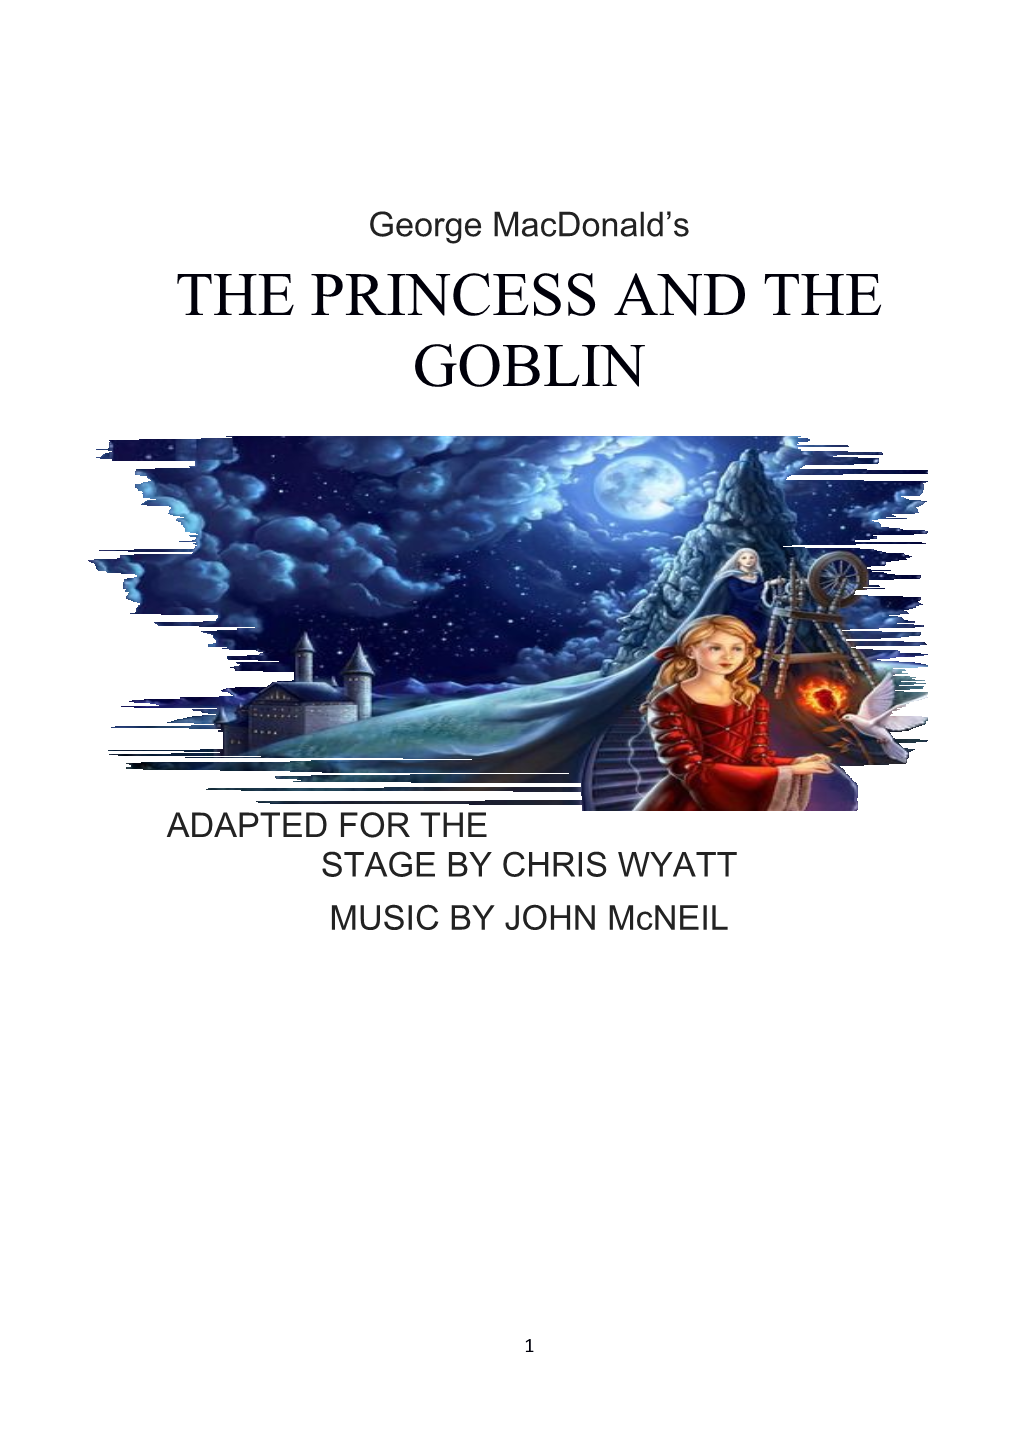 Adapted for the Stage by Chris Wyatt